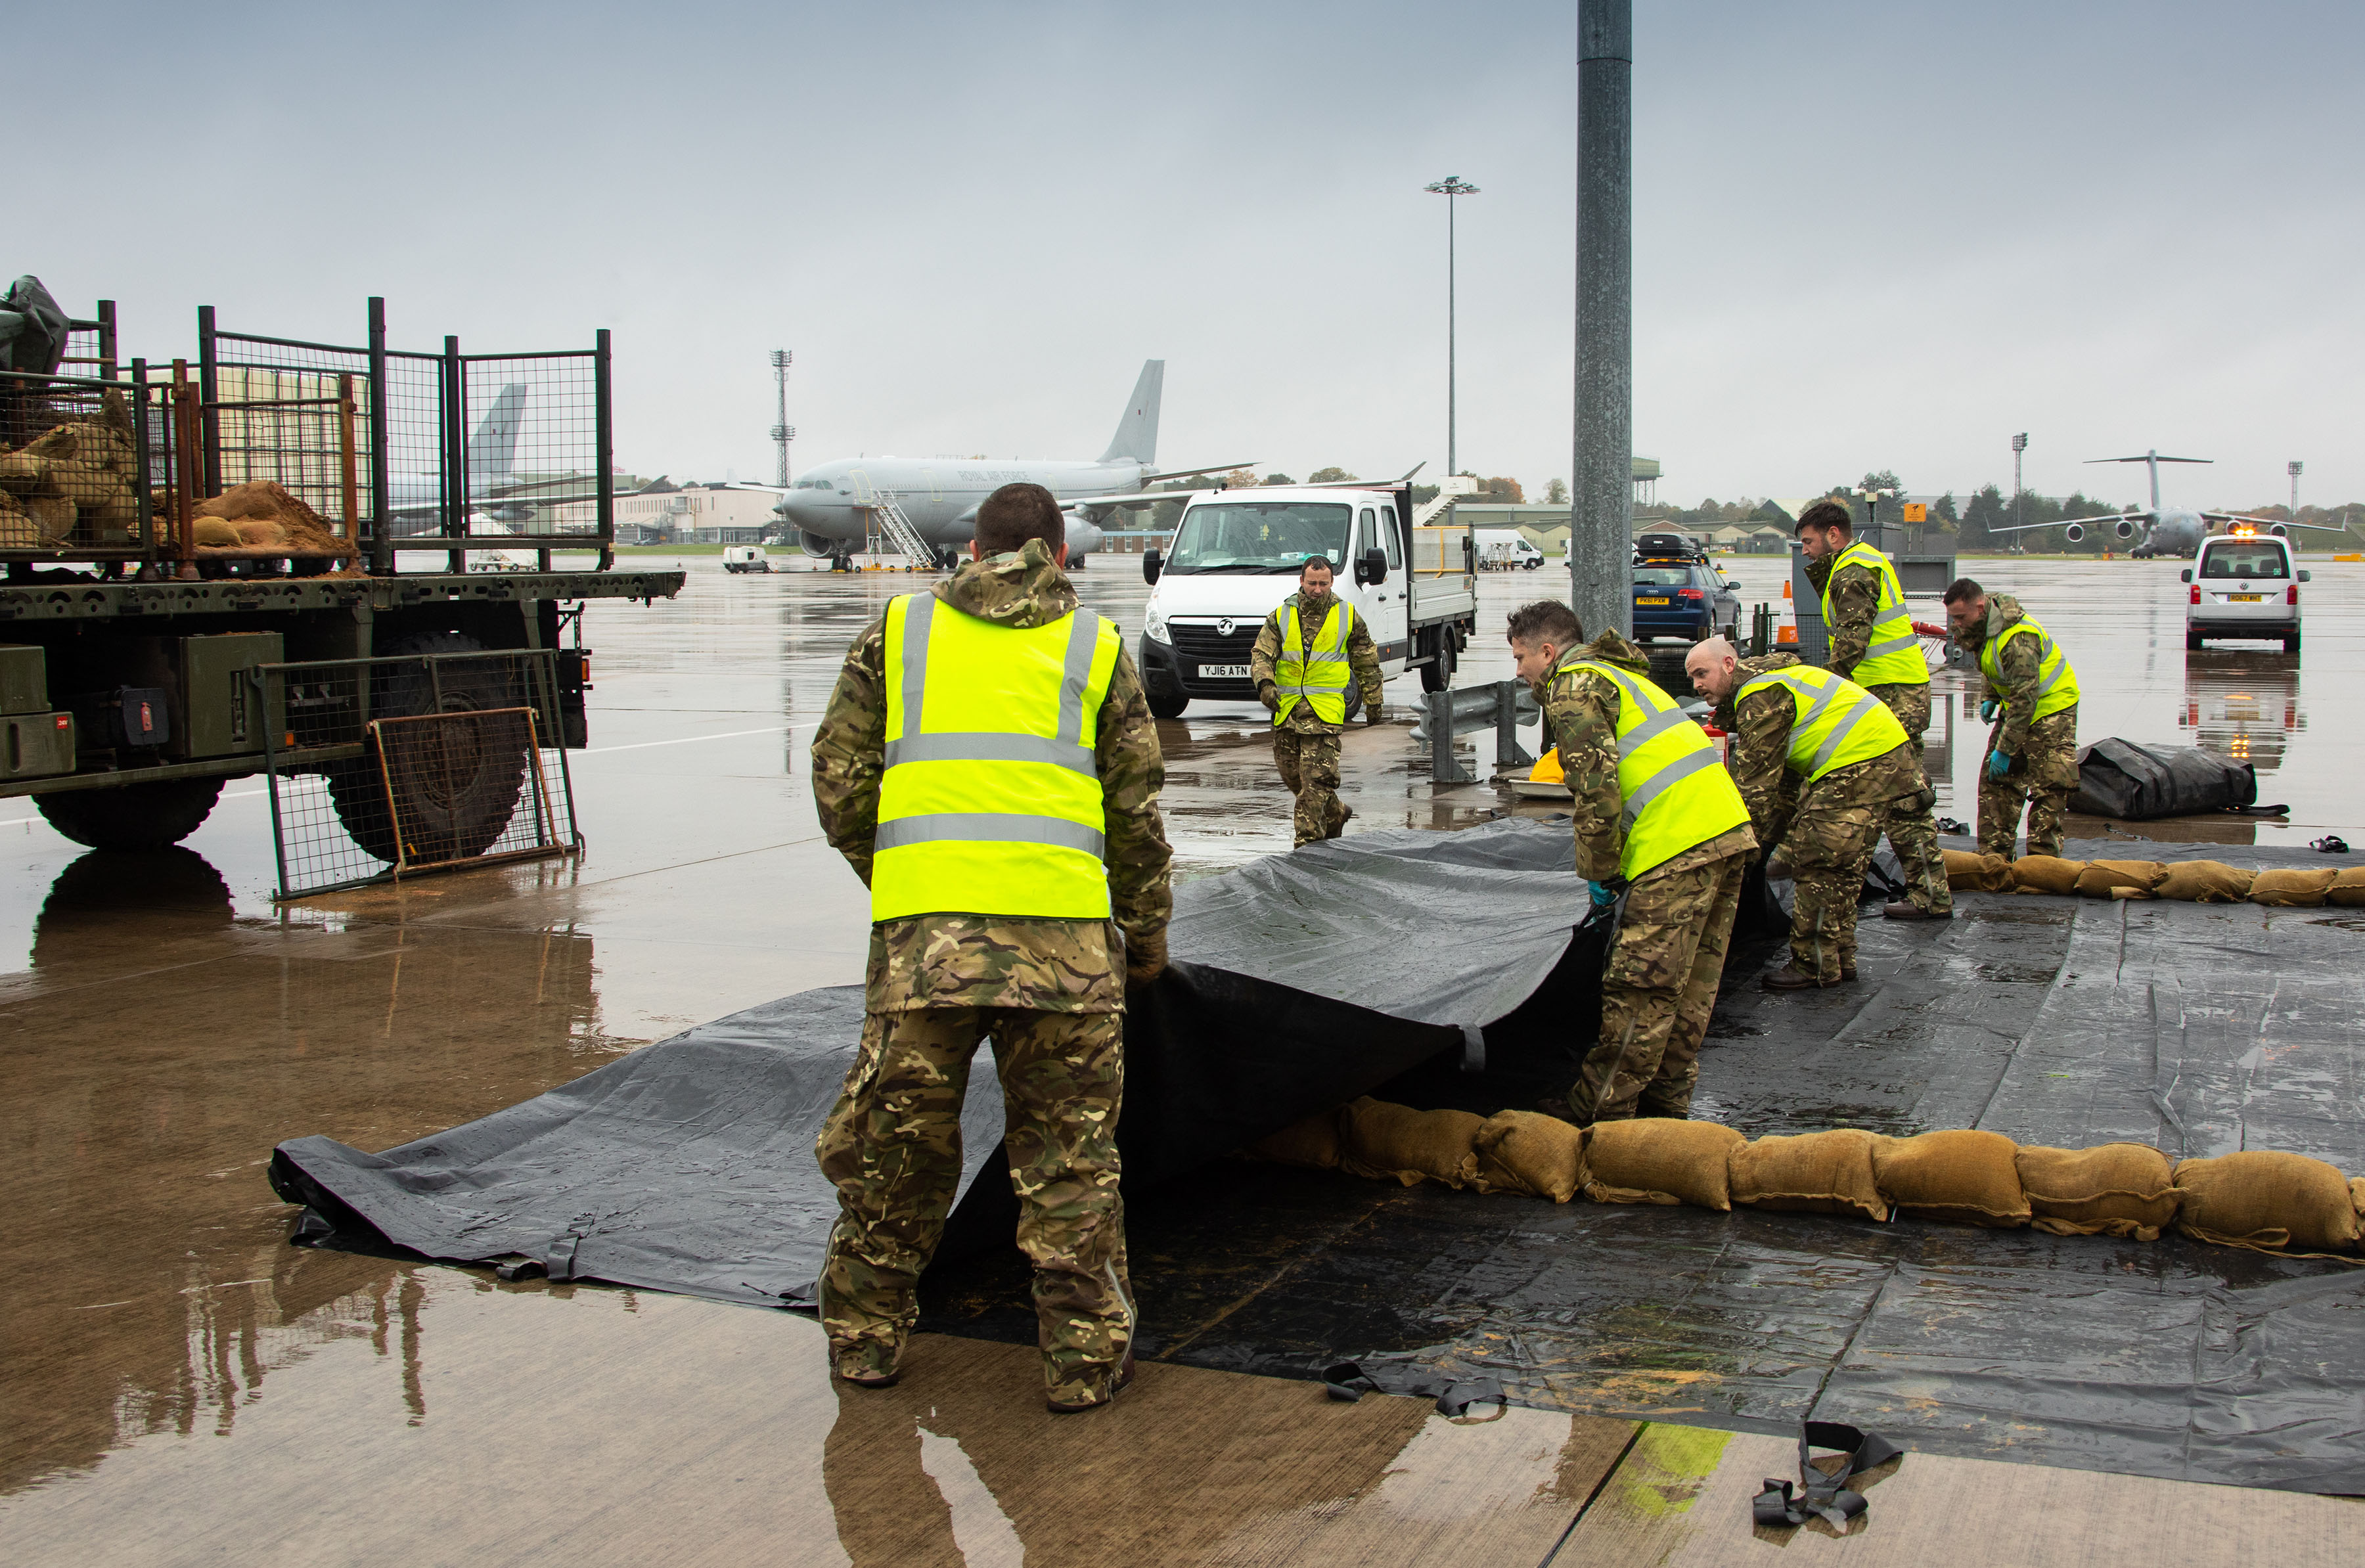 Fuels specialists from the A4 Force Elements at RAF Wittering